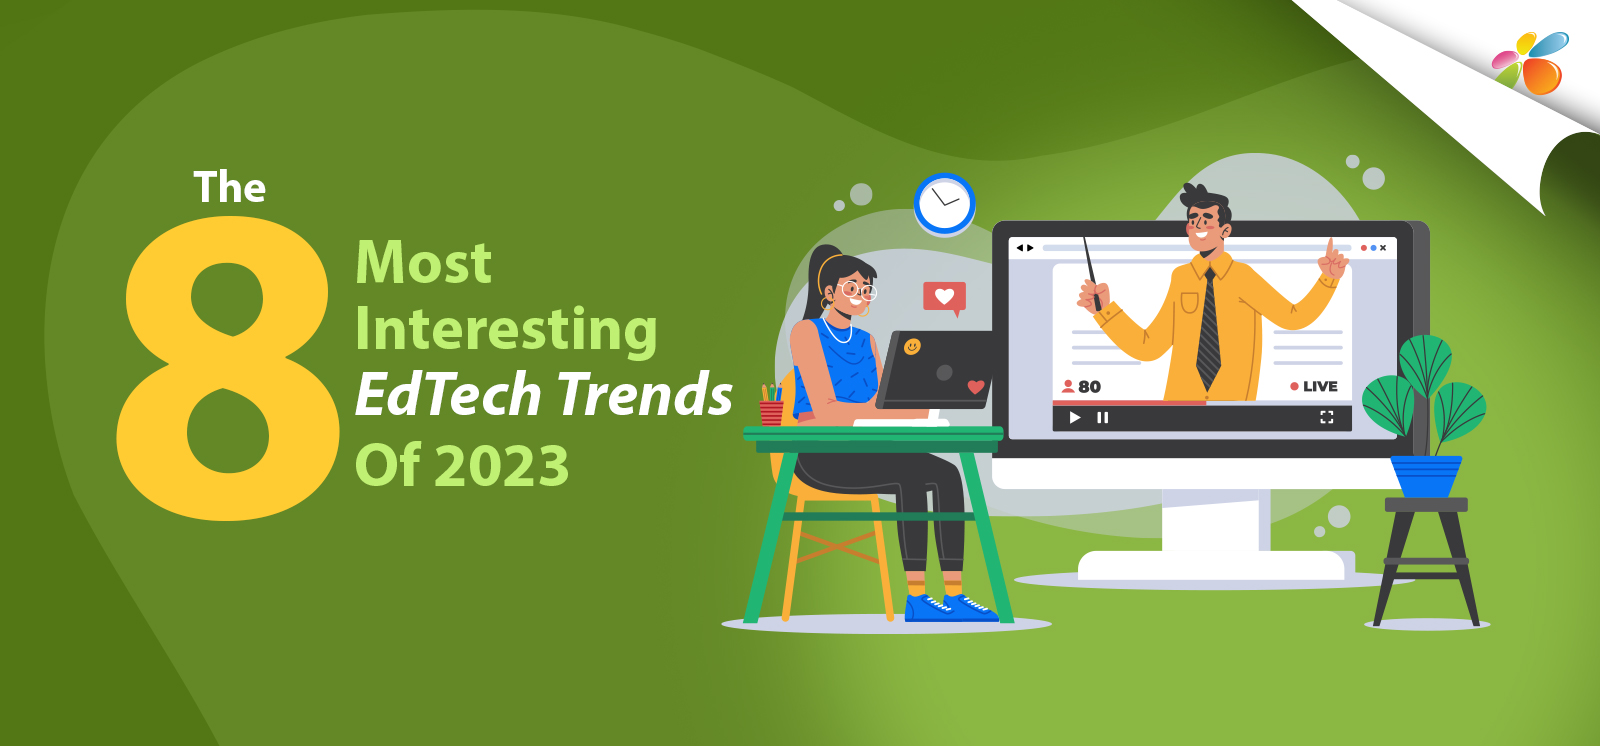 The 6 Most Interesting EdTech Trends Of 2023